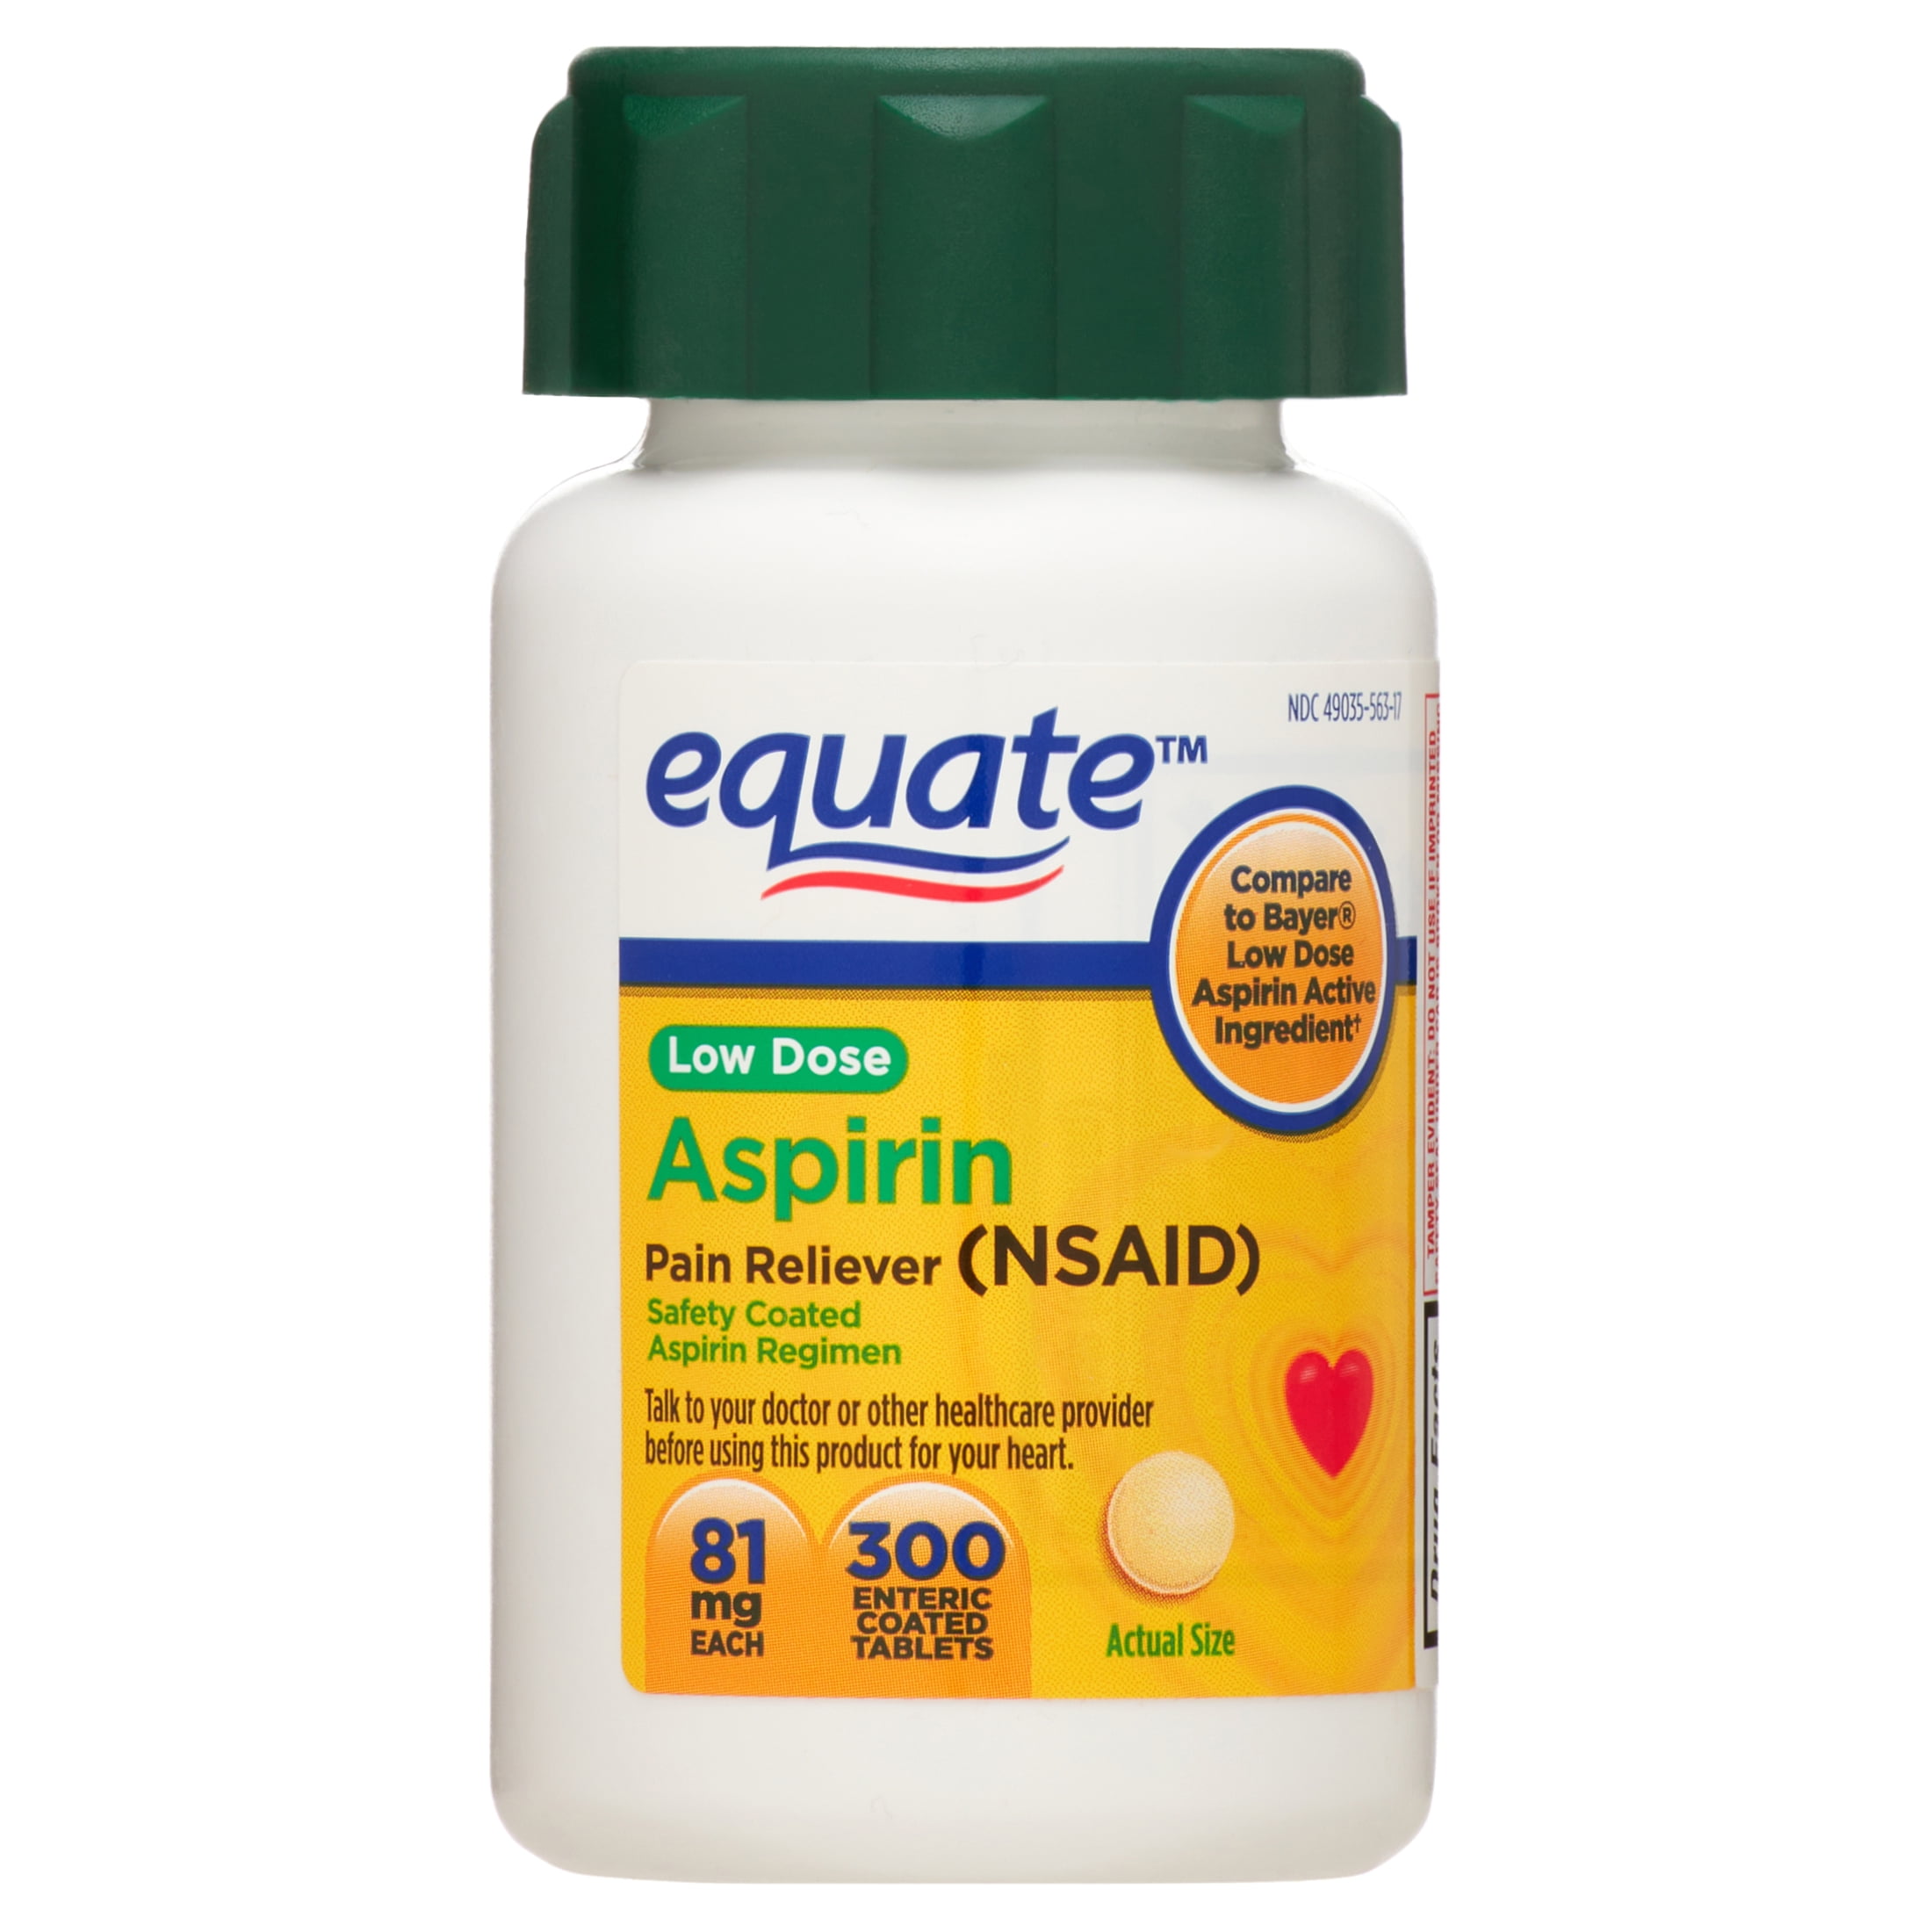 Equate Adult Low Dose Aspirin Safety Coated Tablets, 81 mg, 300 Count